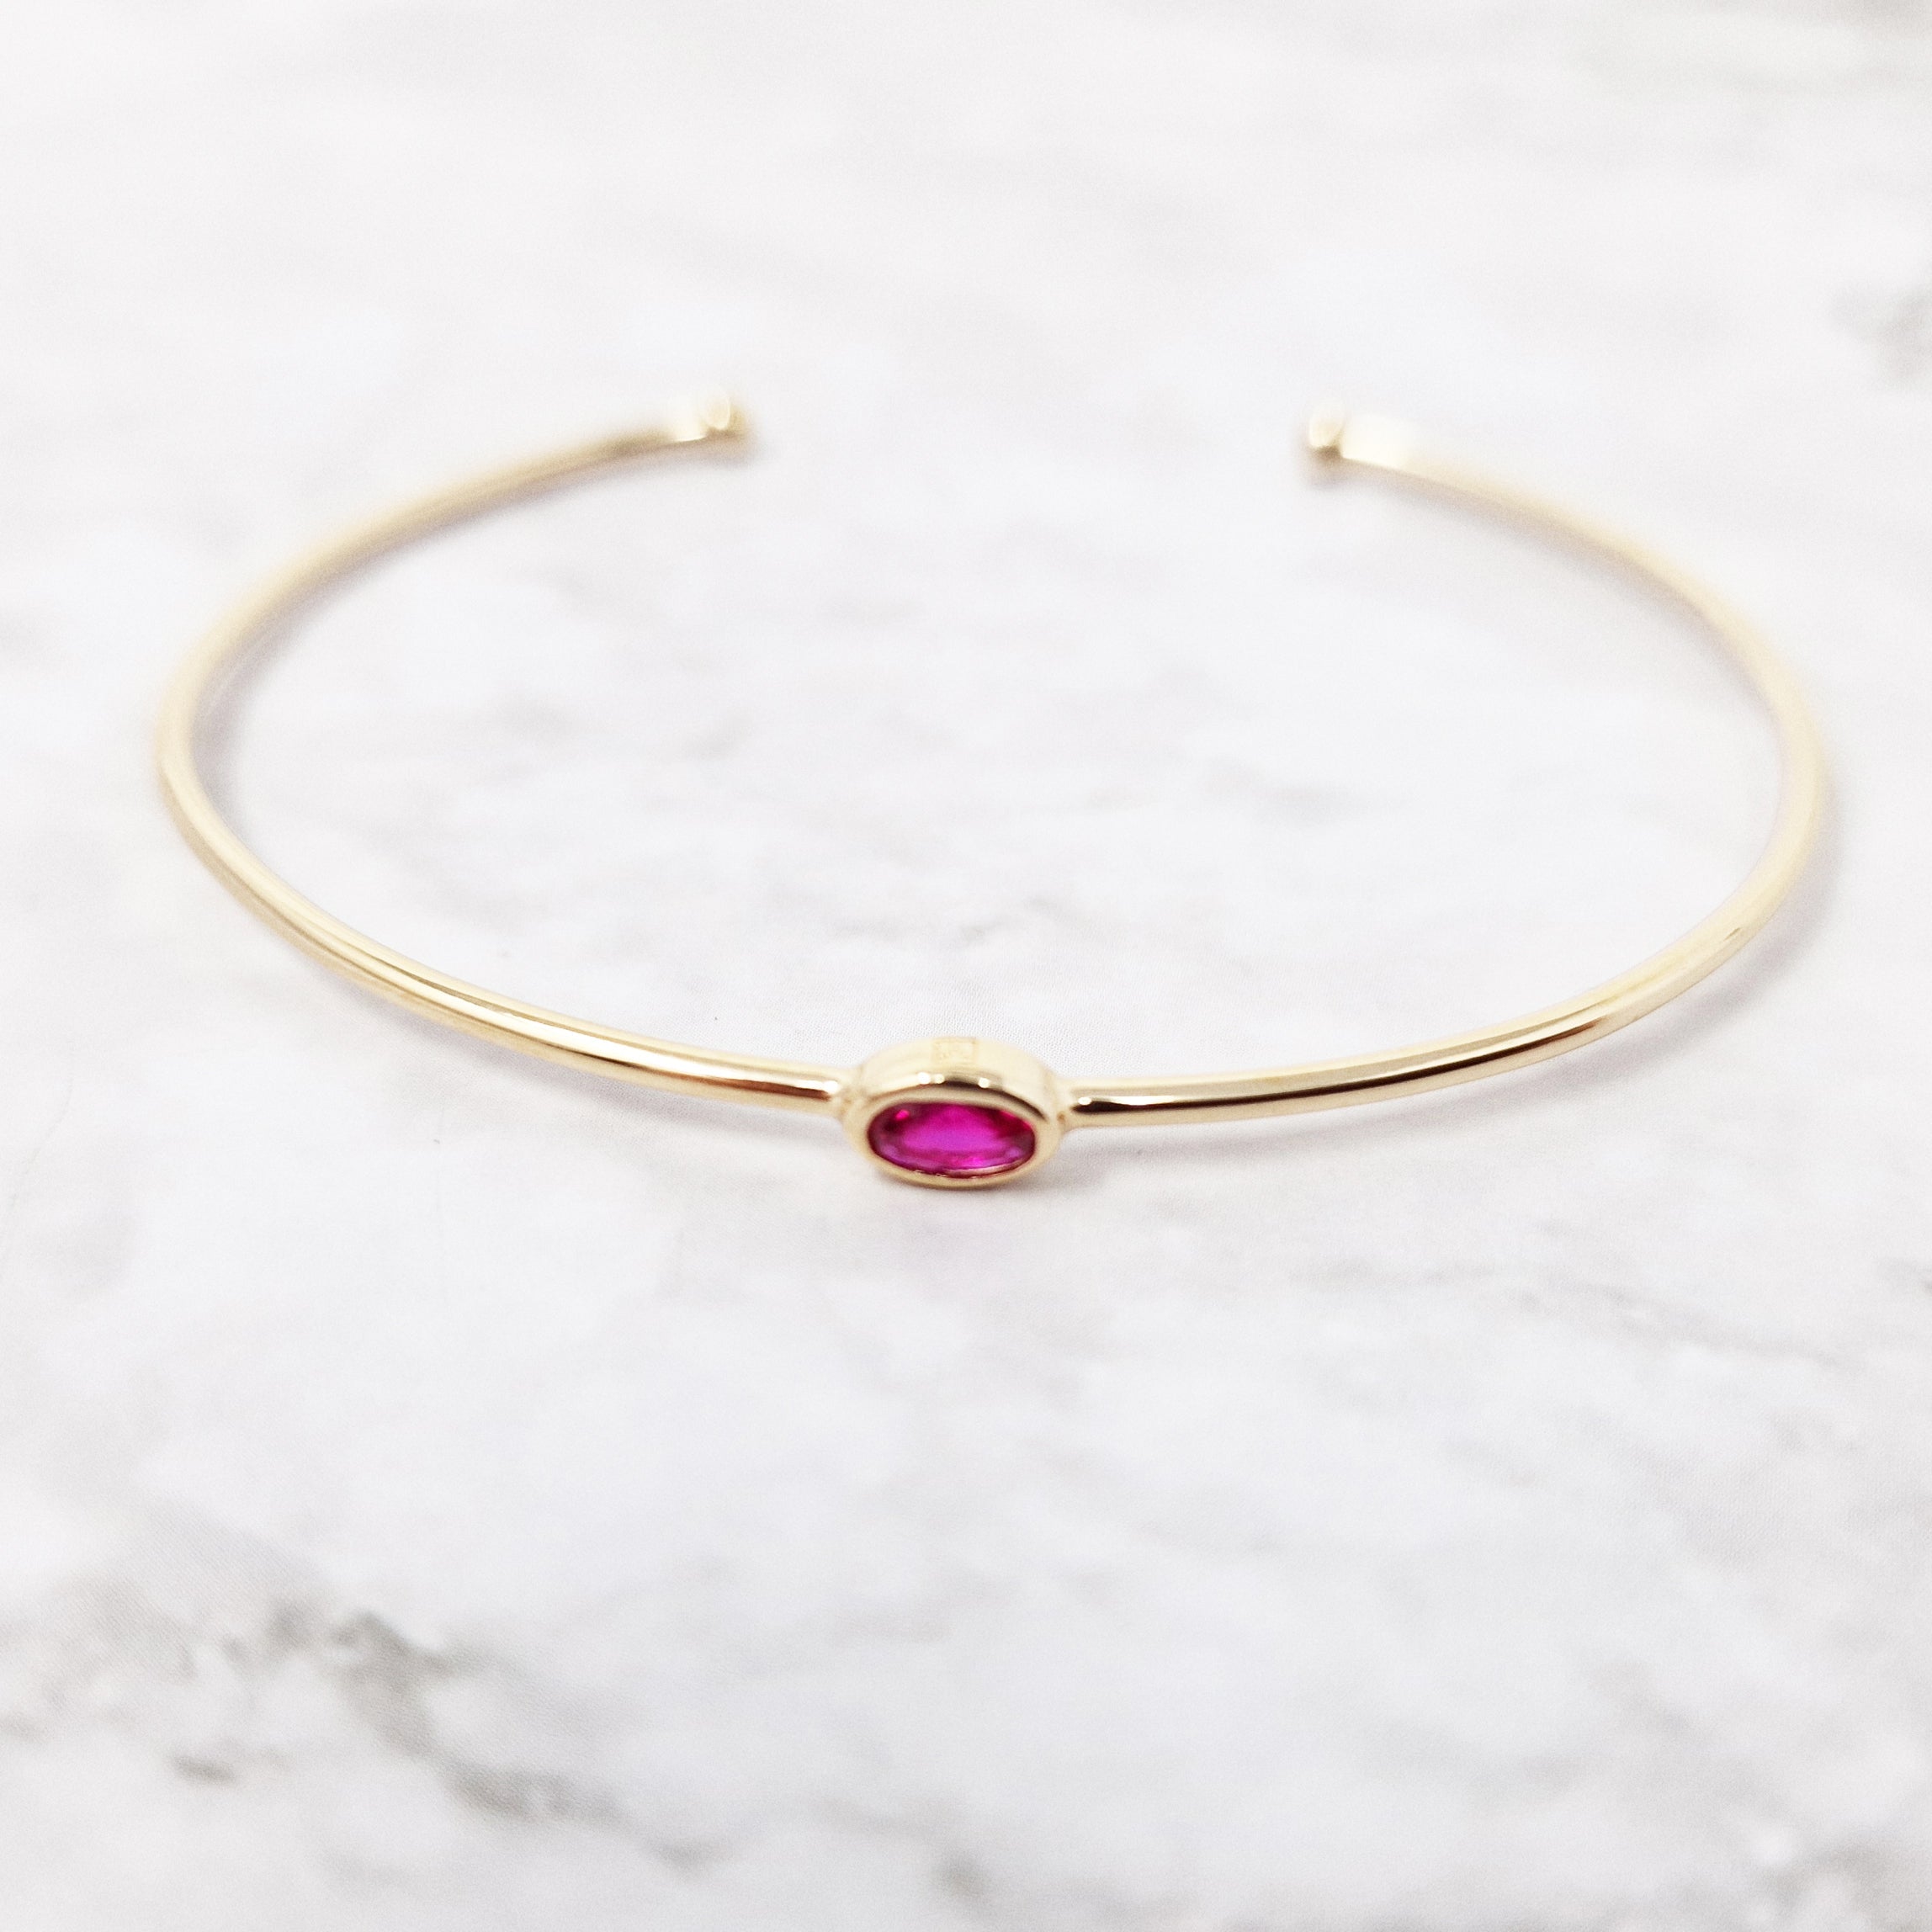 18ct Gold Plated Ruby July Birthstone Bangle